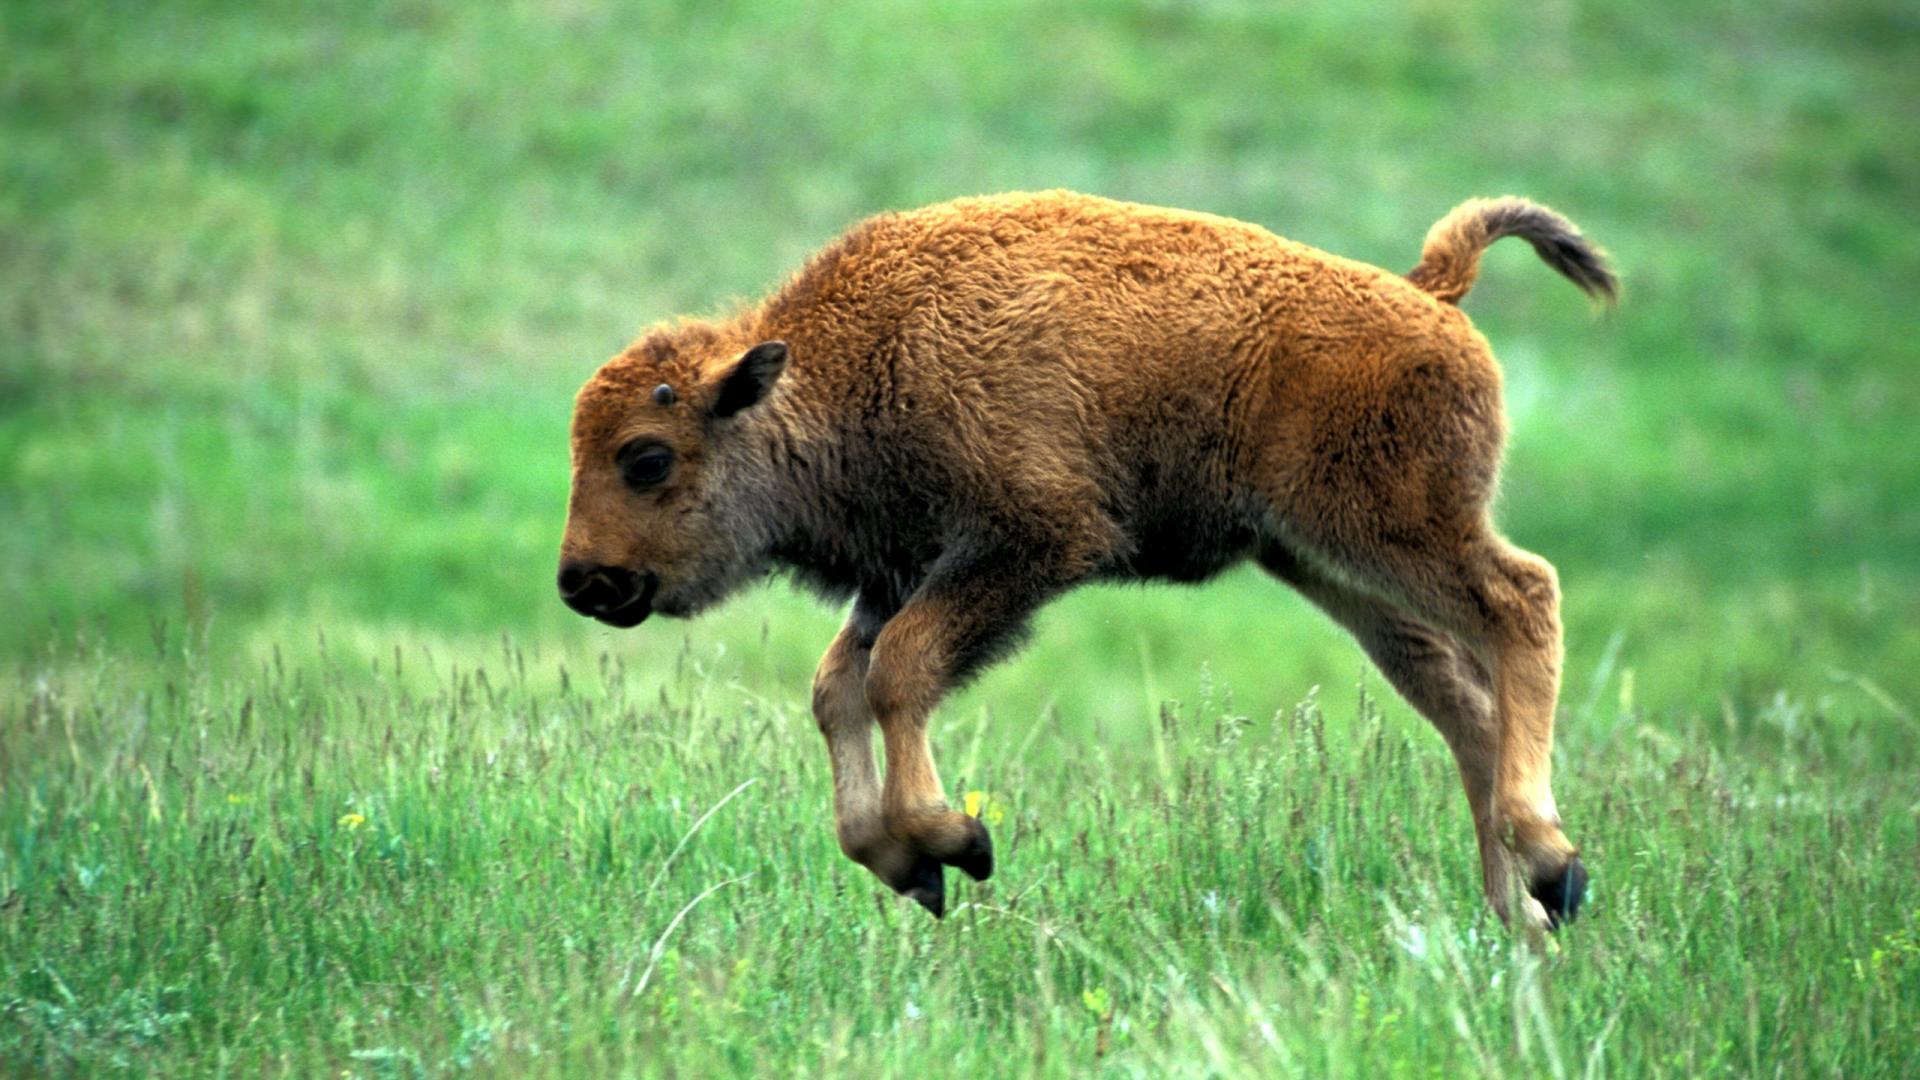 Adorable Baby Bison HD Wallpaper, Background Images